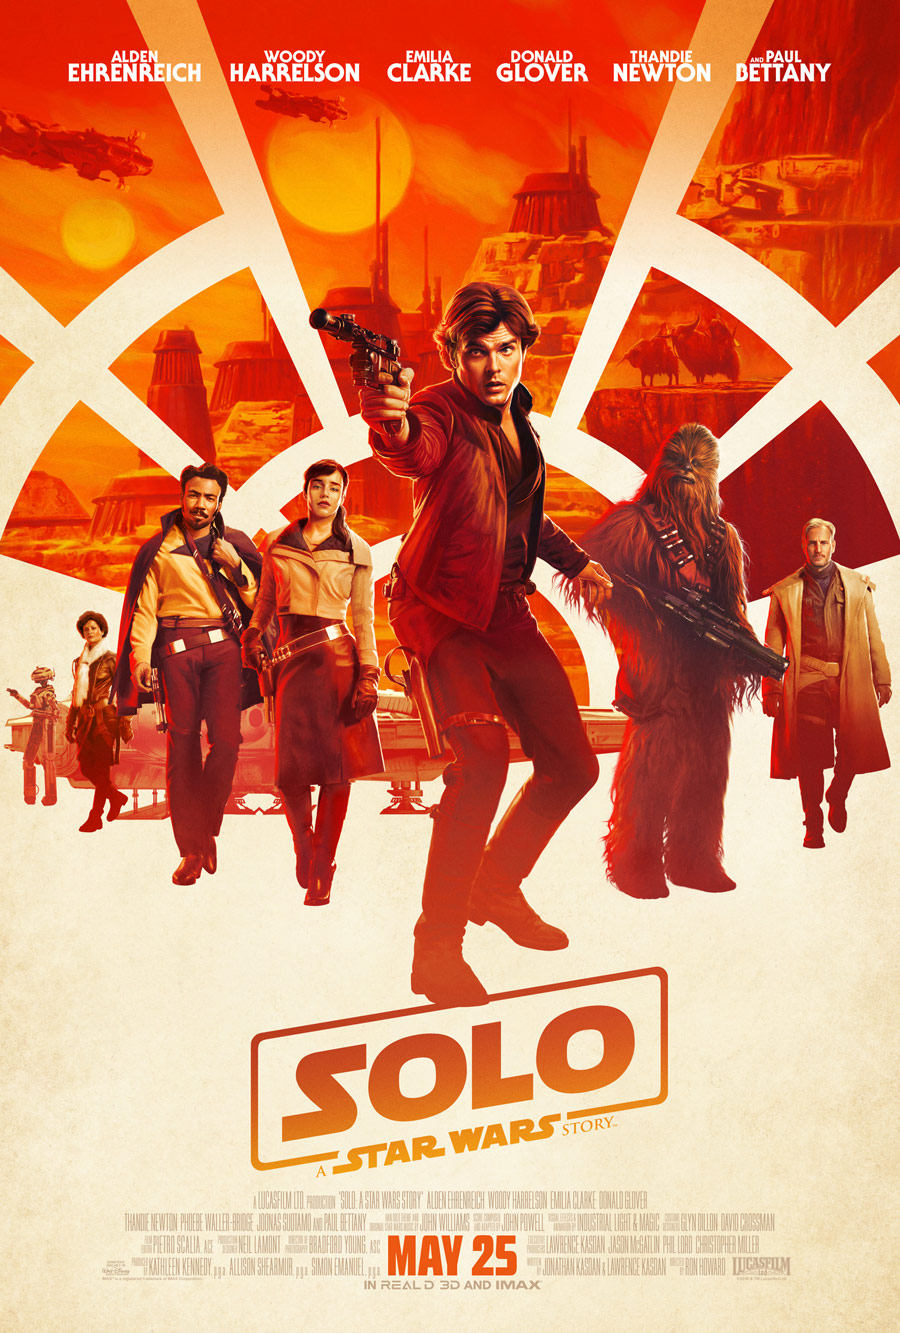 Official Han Solo Movie Trailer and Poster